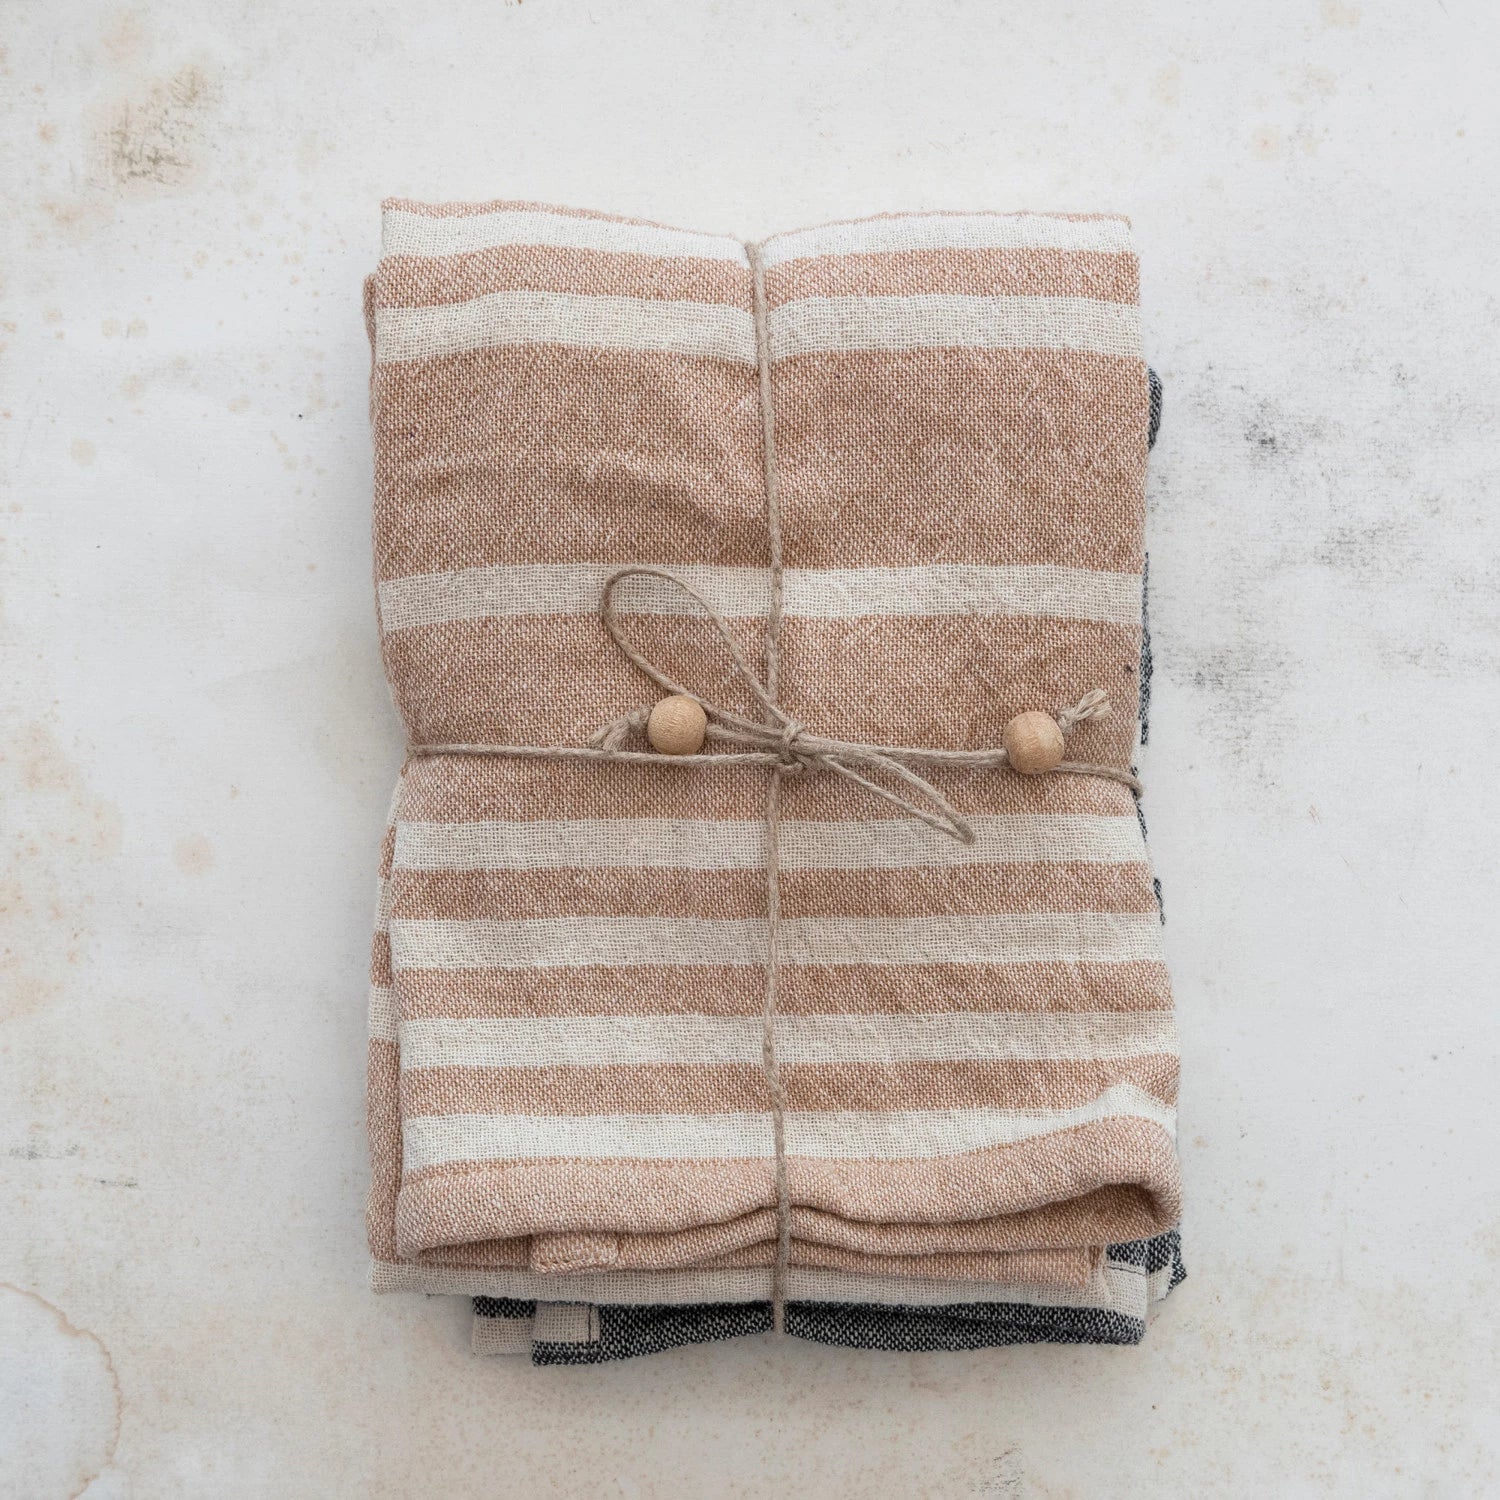 Double Cloth Striped Dish Towel Gift Set